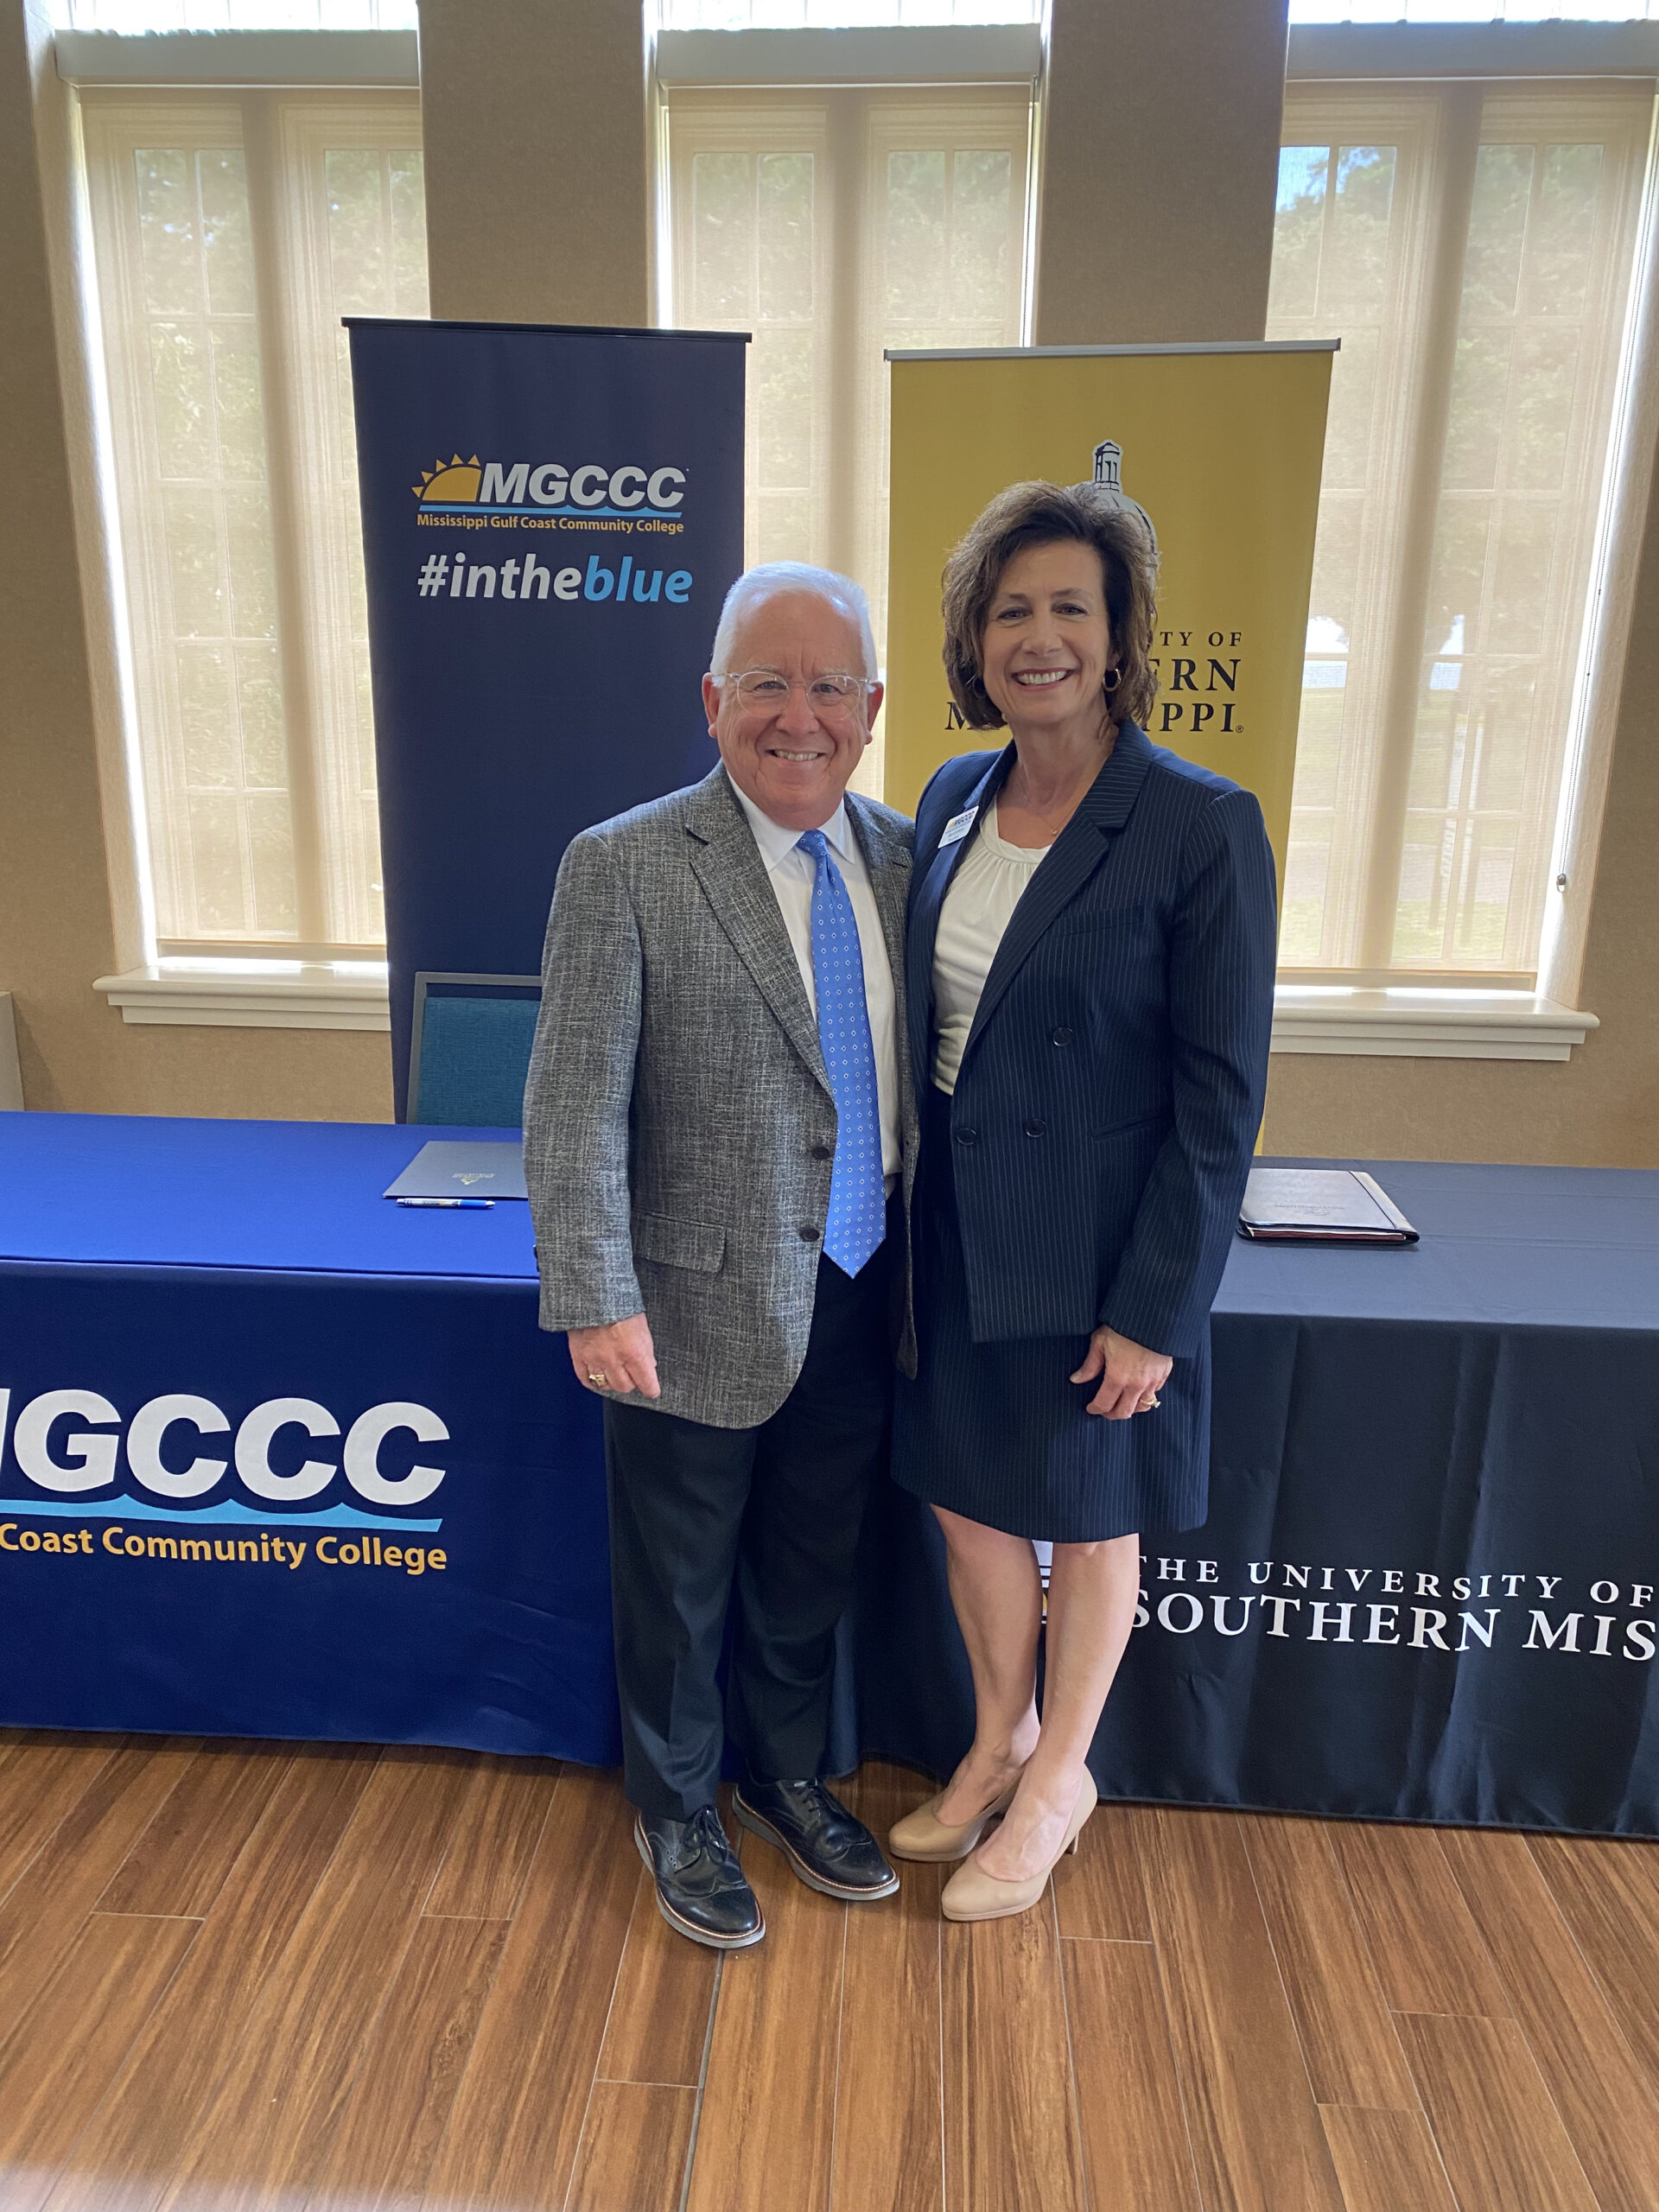 From left, are Southern Miss President Dr. Joseph S. Paul and MGCCC President Dr. Mary S. Graham 